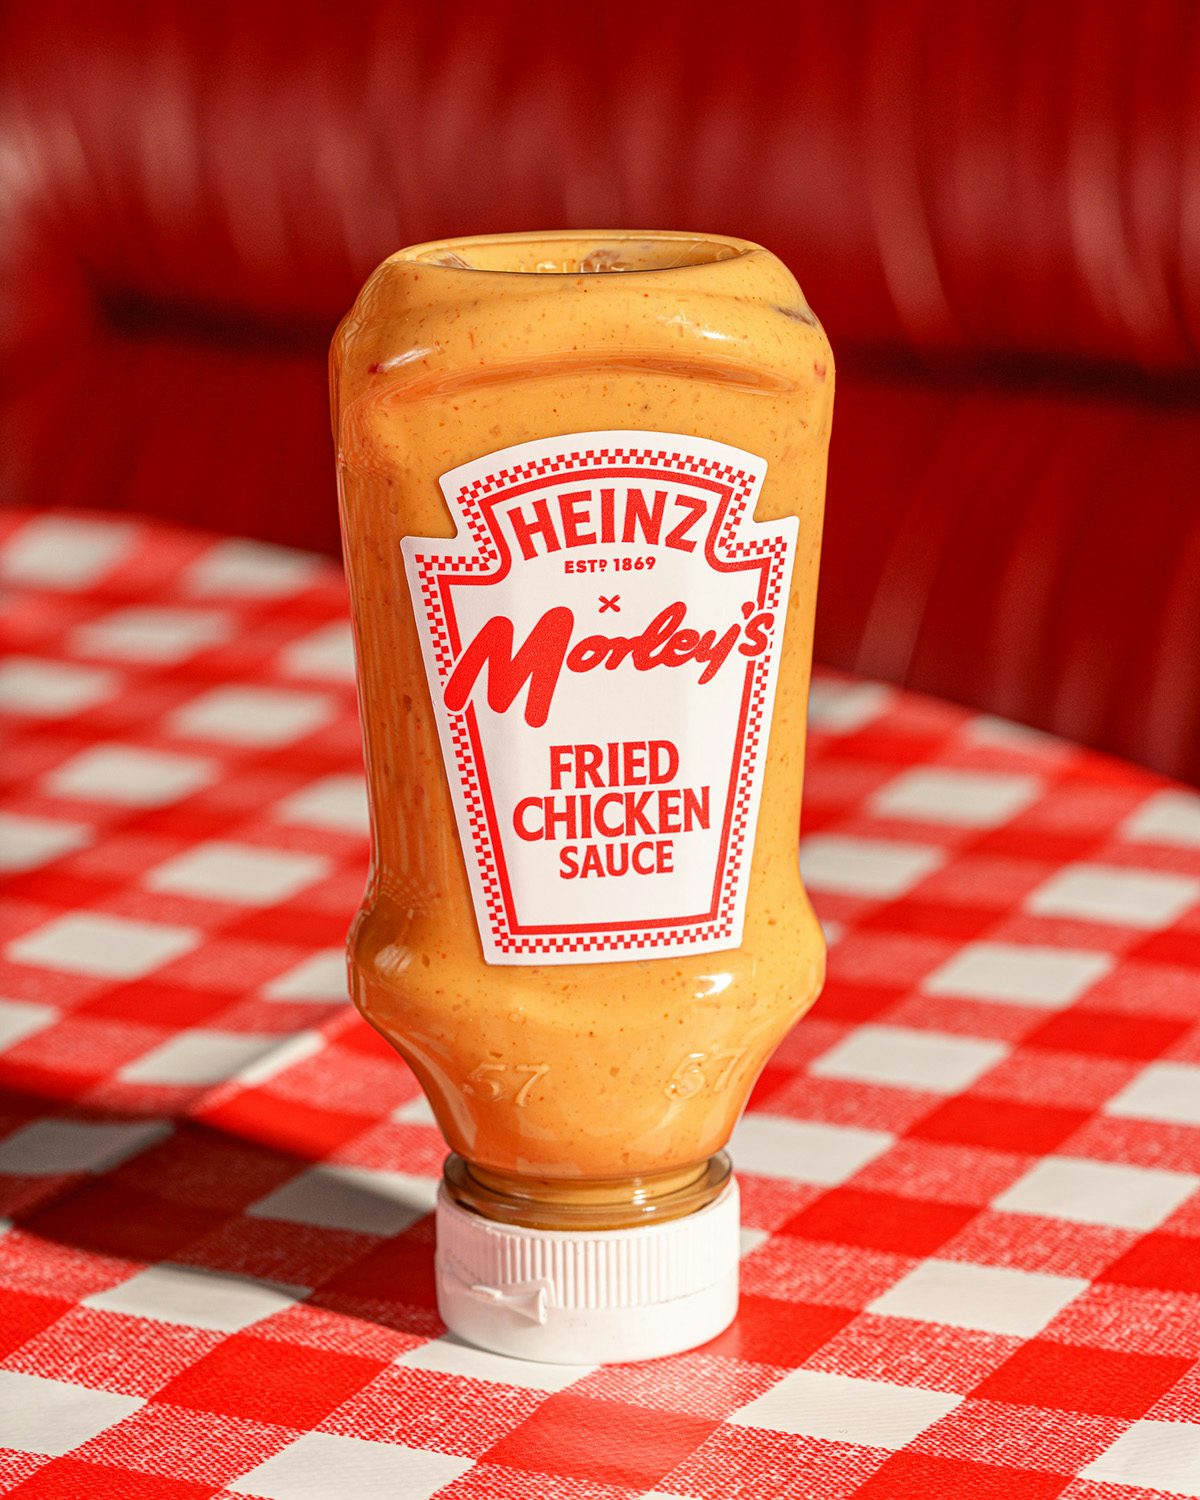 Photograph of a squeezy bottle of Heinz and Morley's Fried Chicken Sauce on a red gingham tablecloth